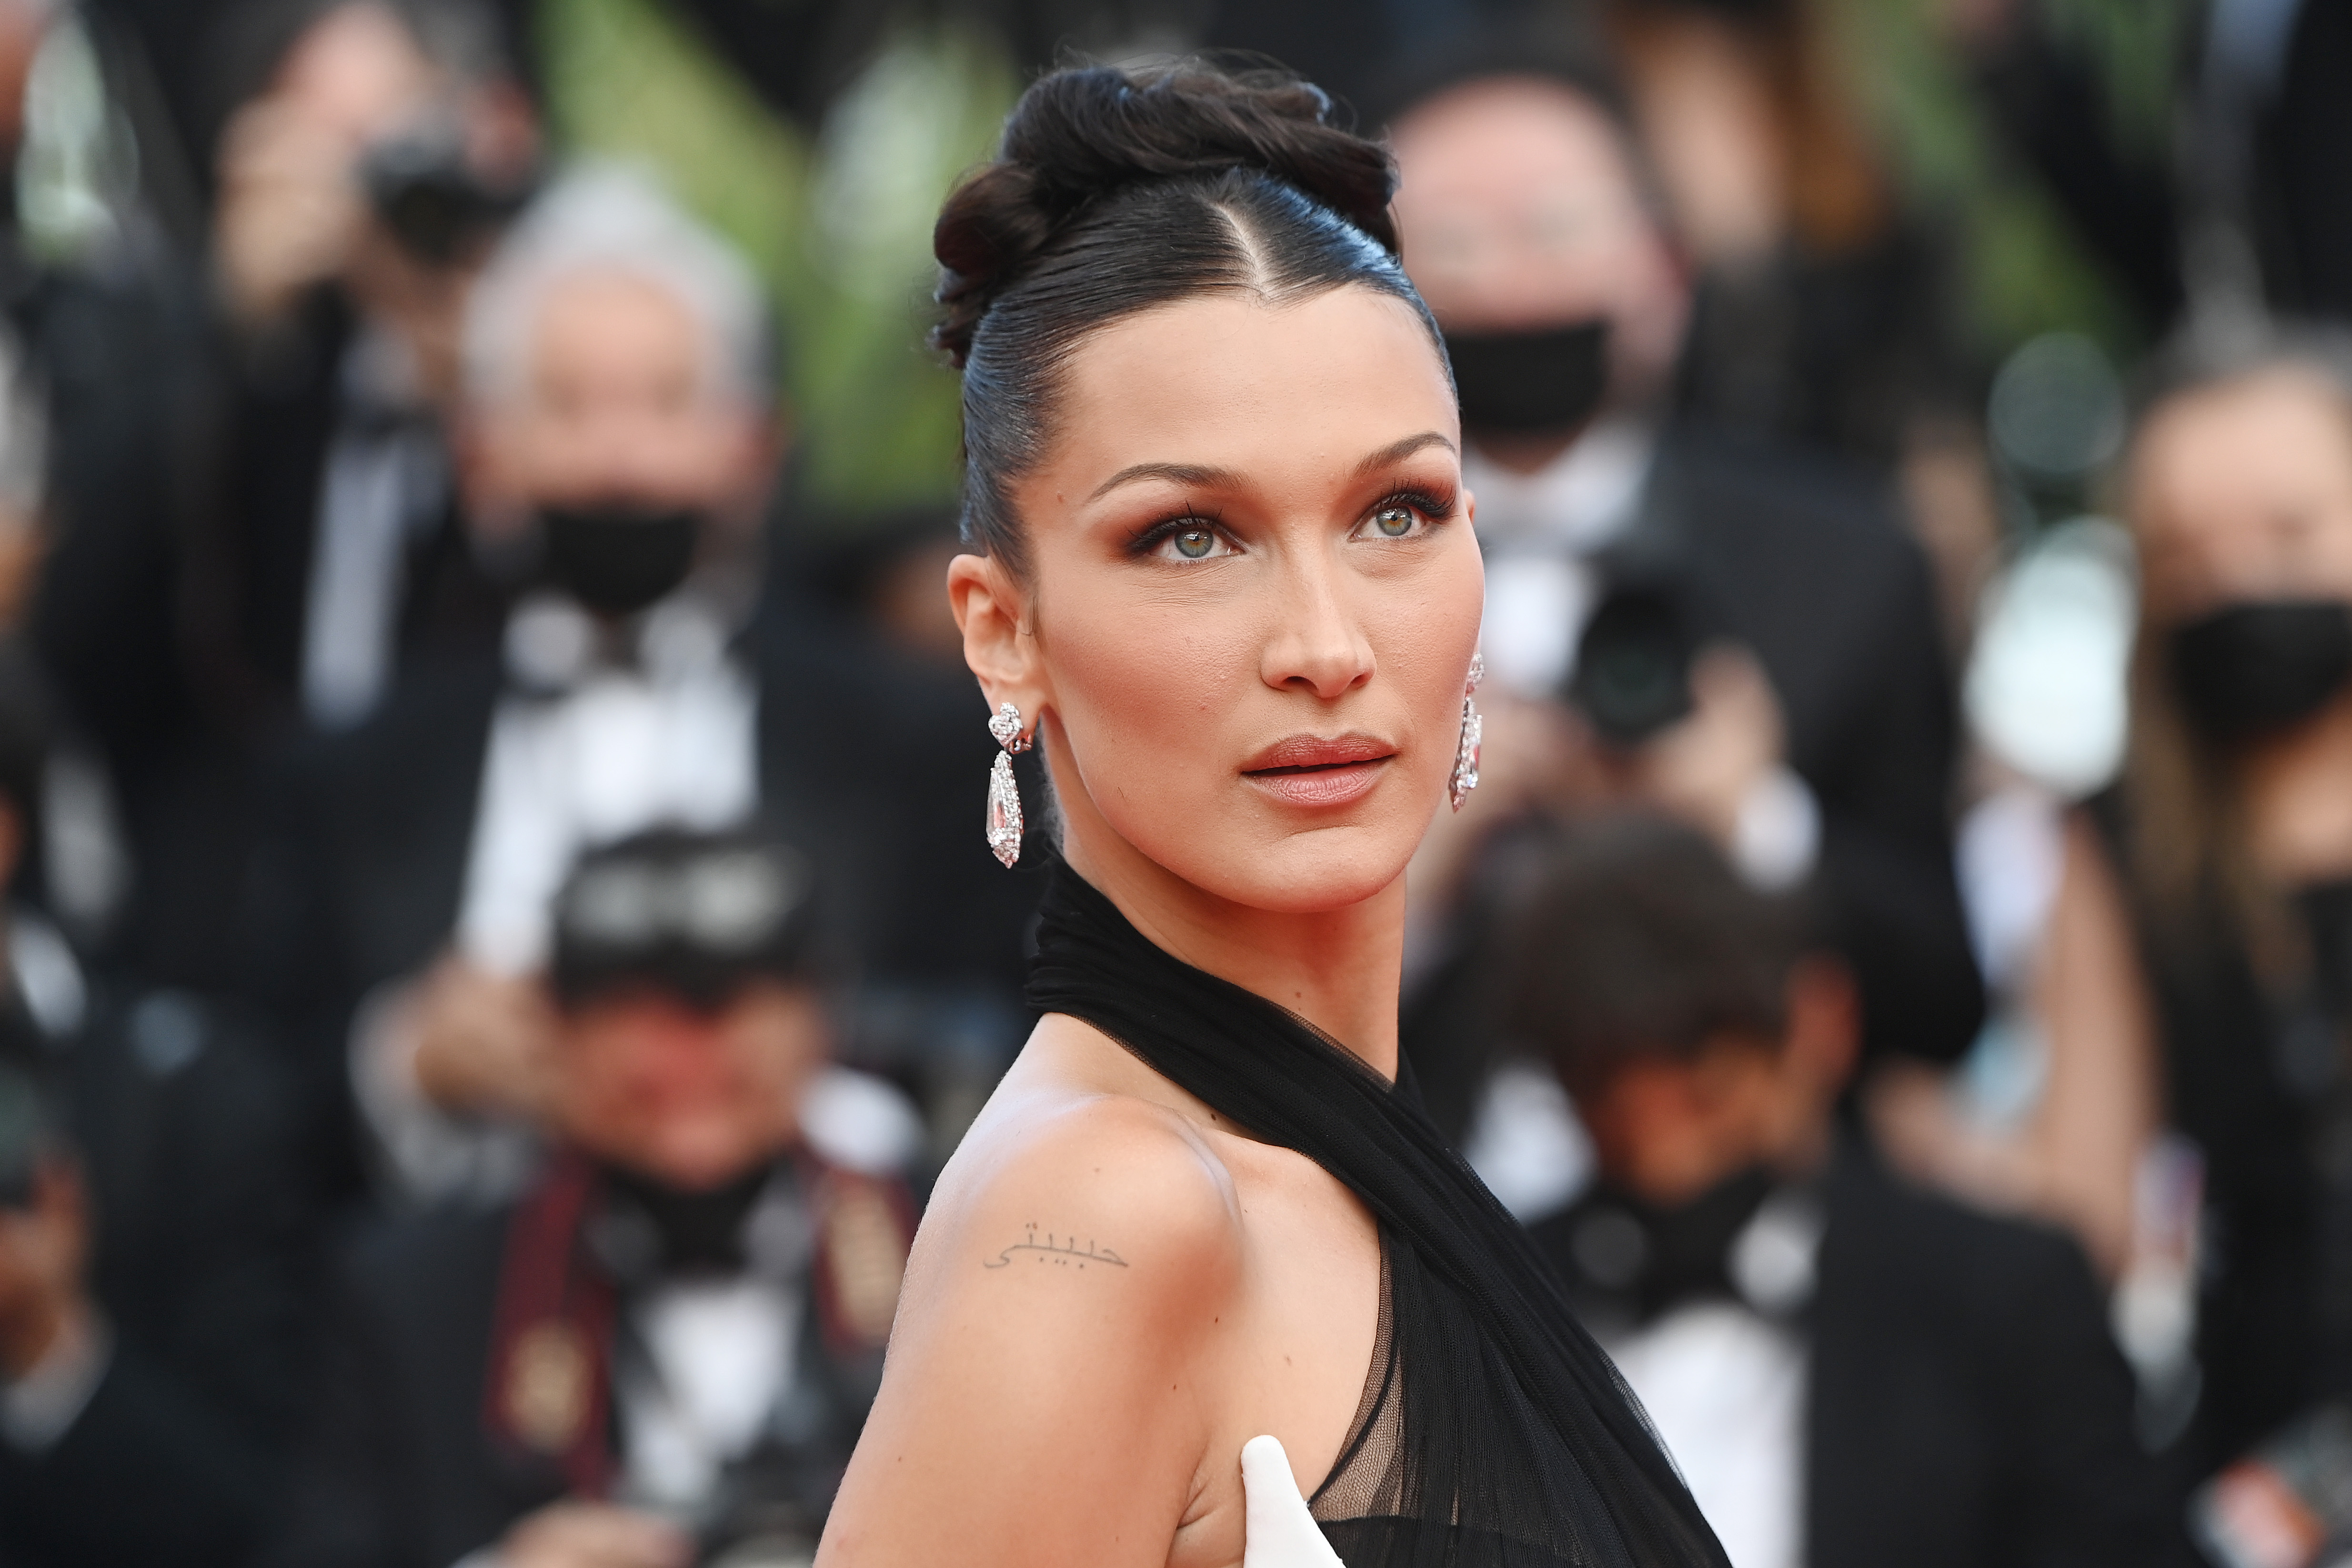 Bella Hadid opens up about her battle with depression and anxiety